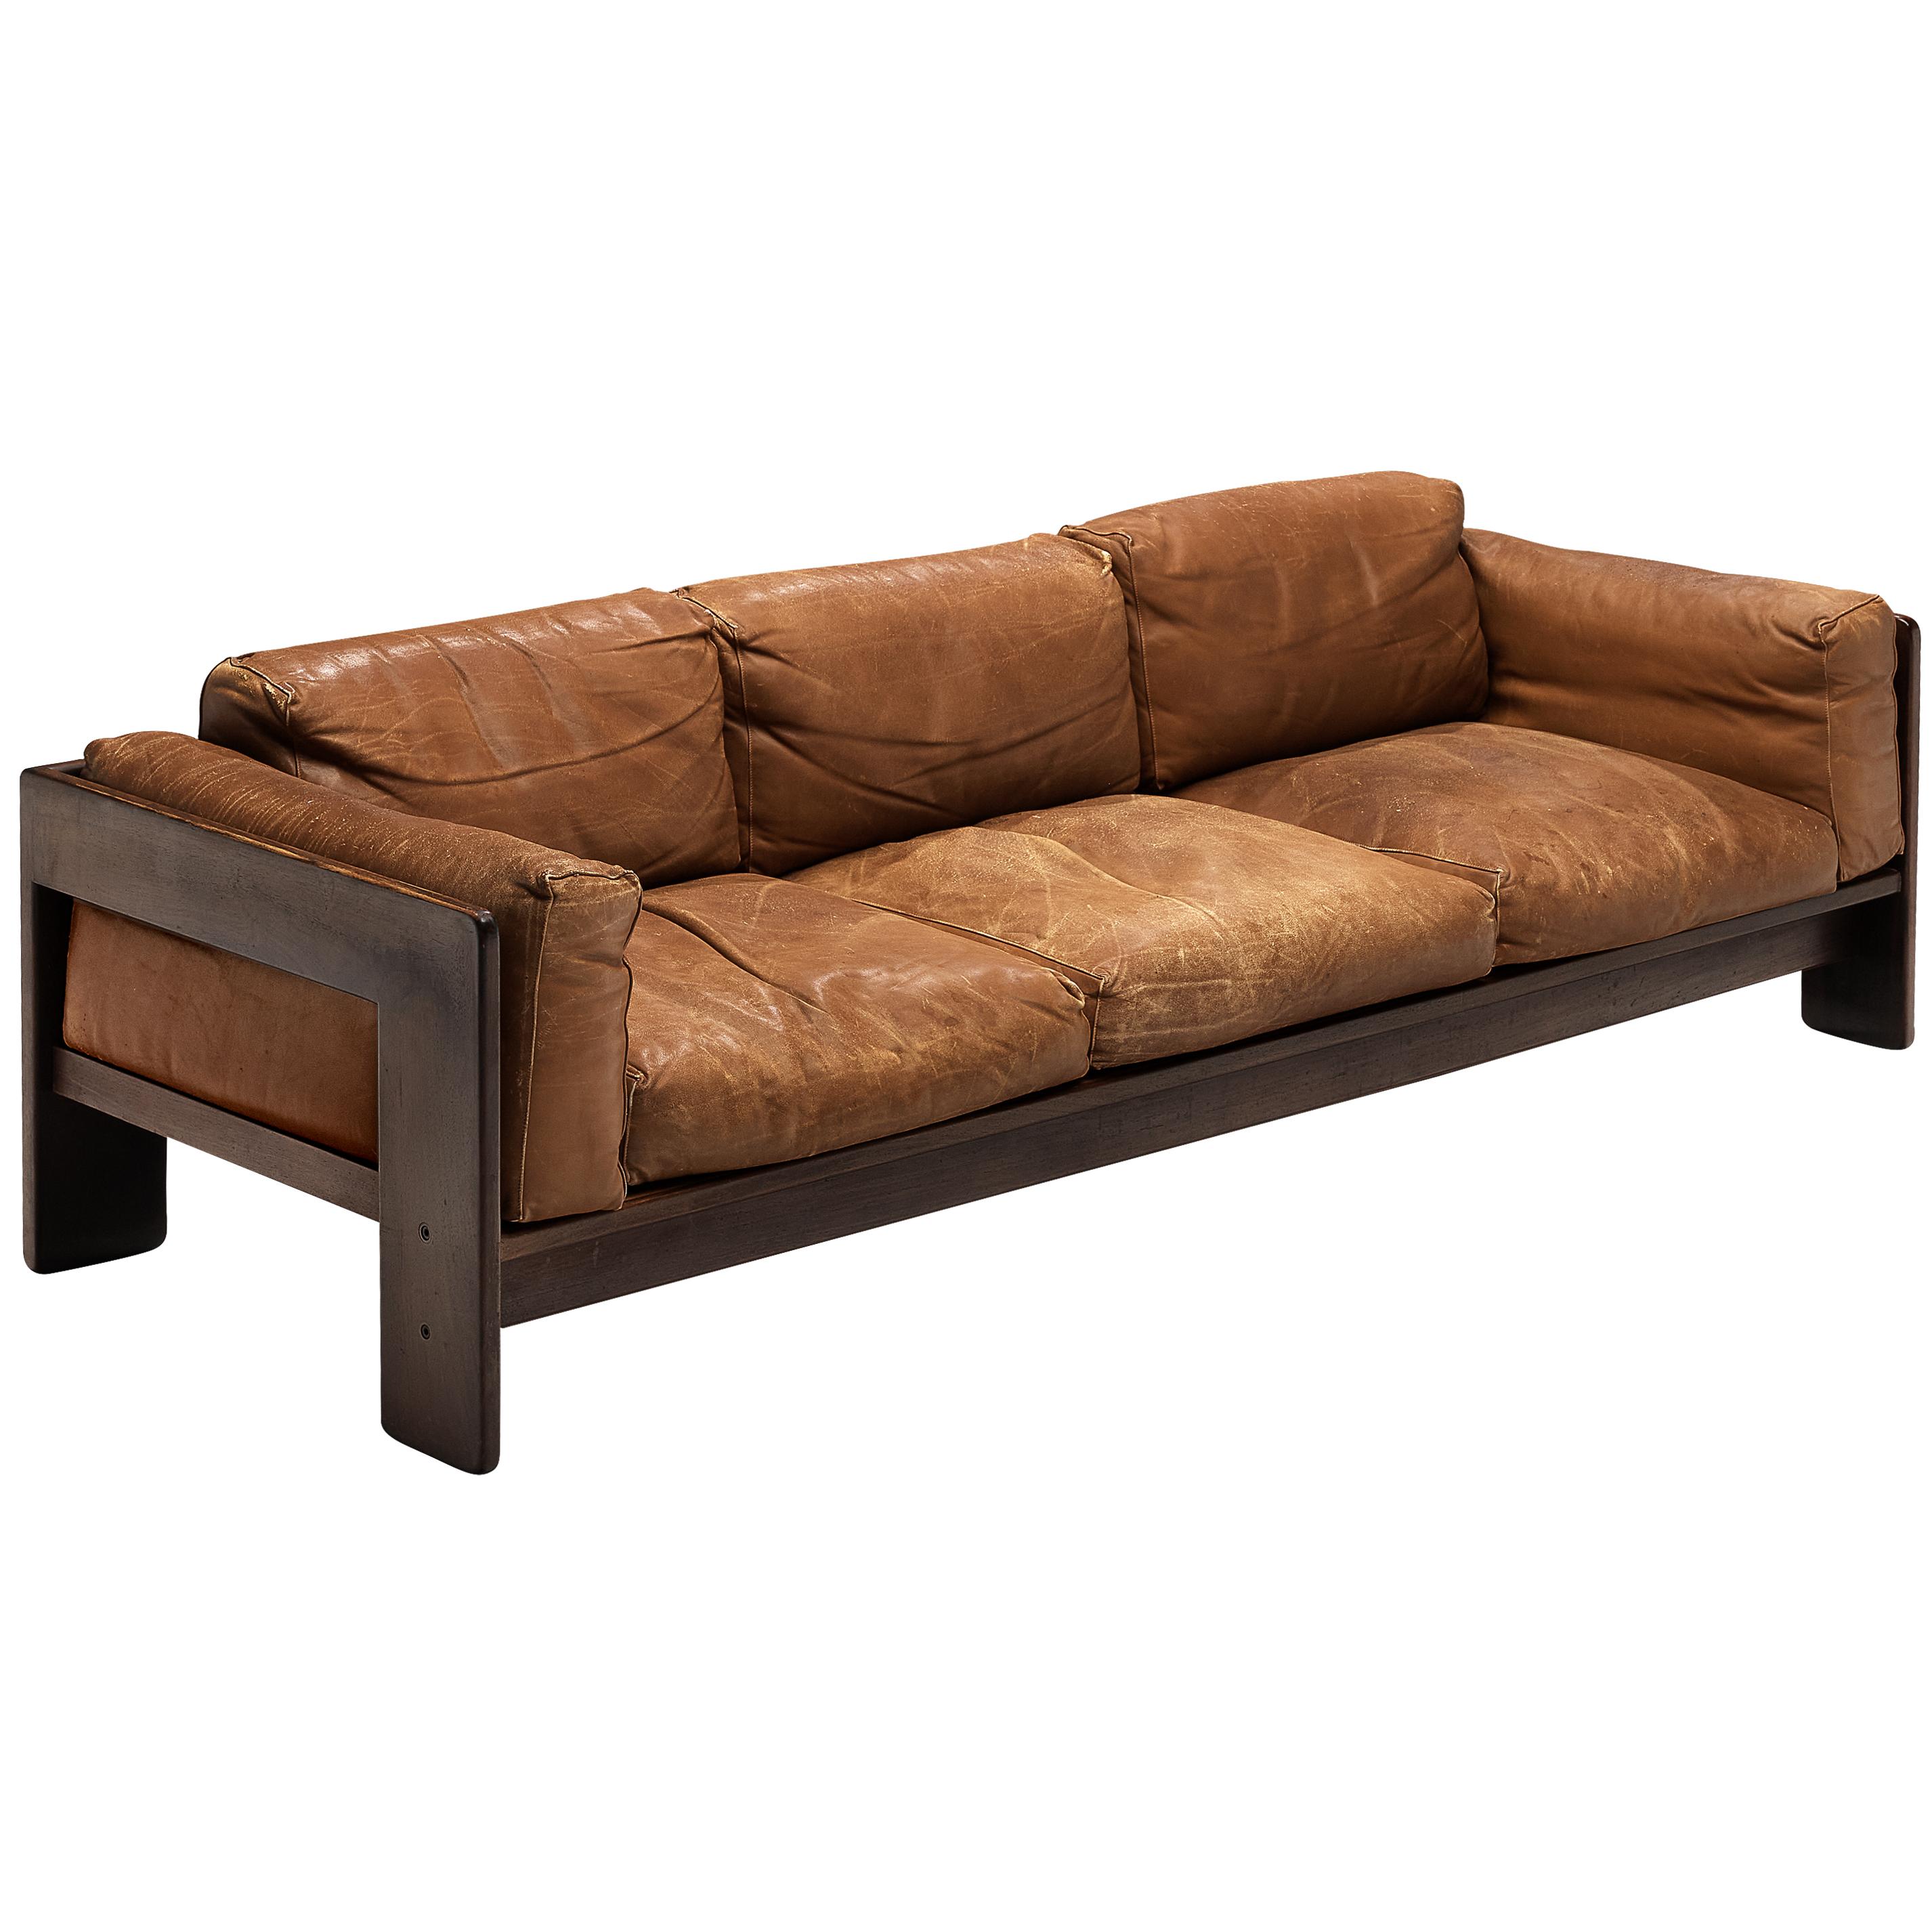 Afra and Tobia Scarpa for Knoll 'Bastiano' Sofa in Patinated Brown Leather  For Sale at 1stDibs